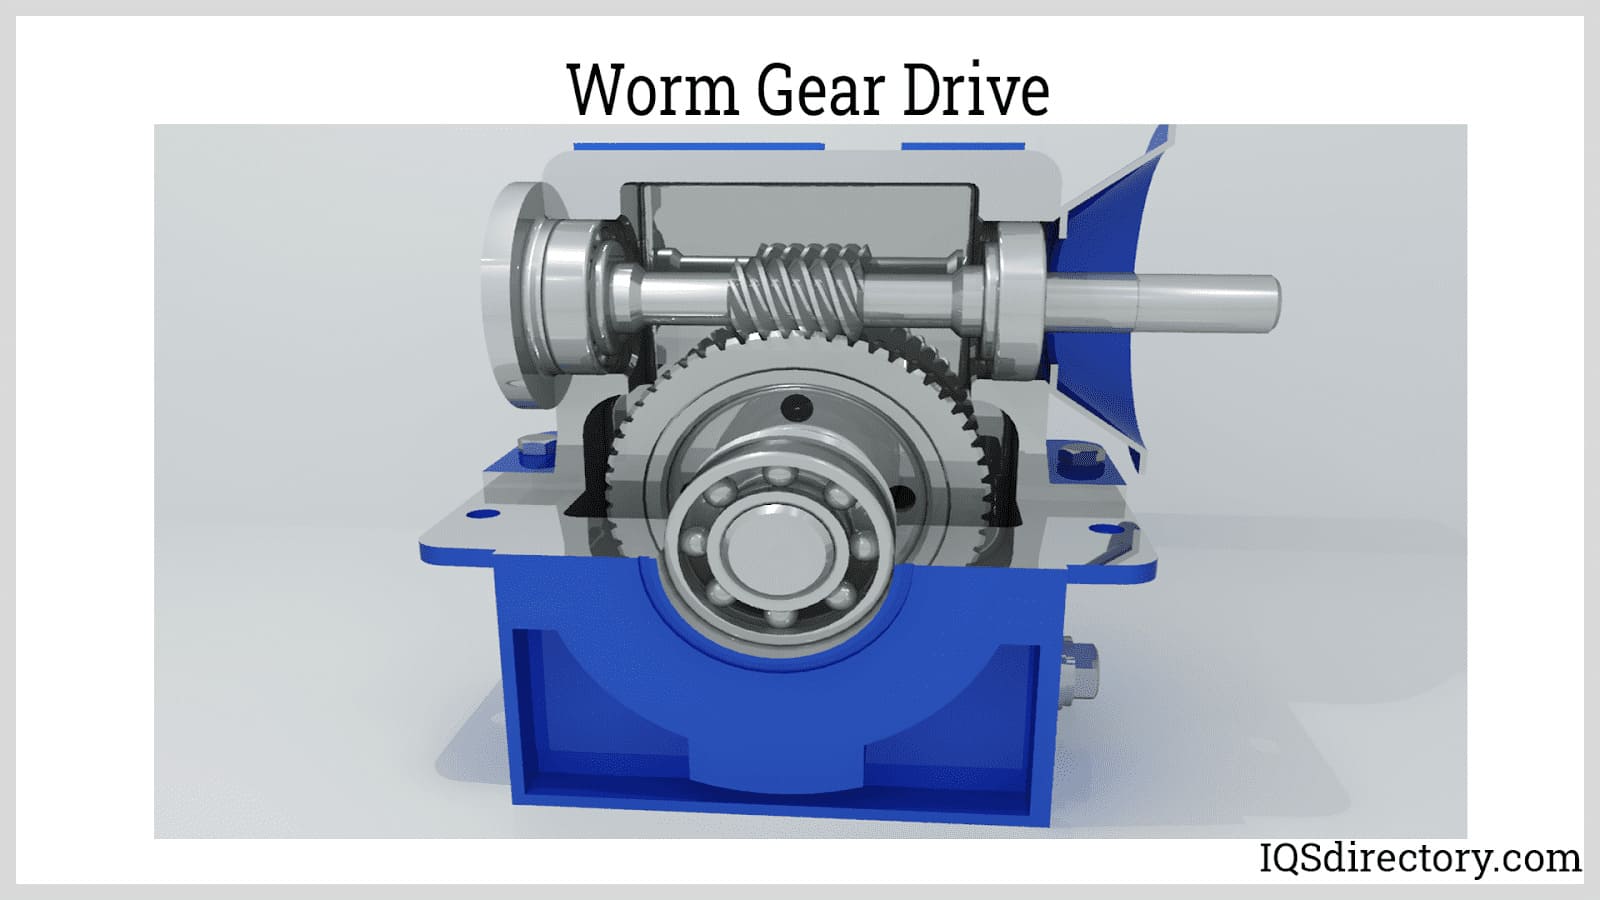 Right Angle Gear Box Manufacturers Suppliers